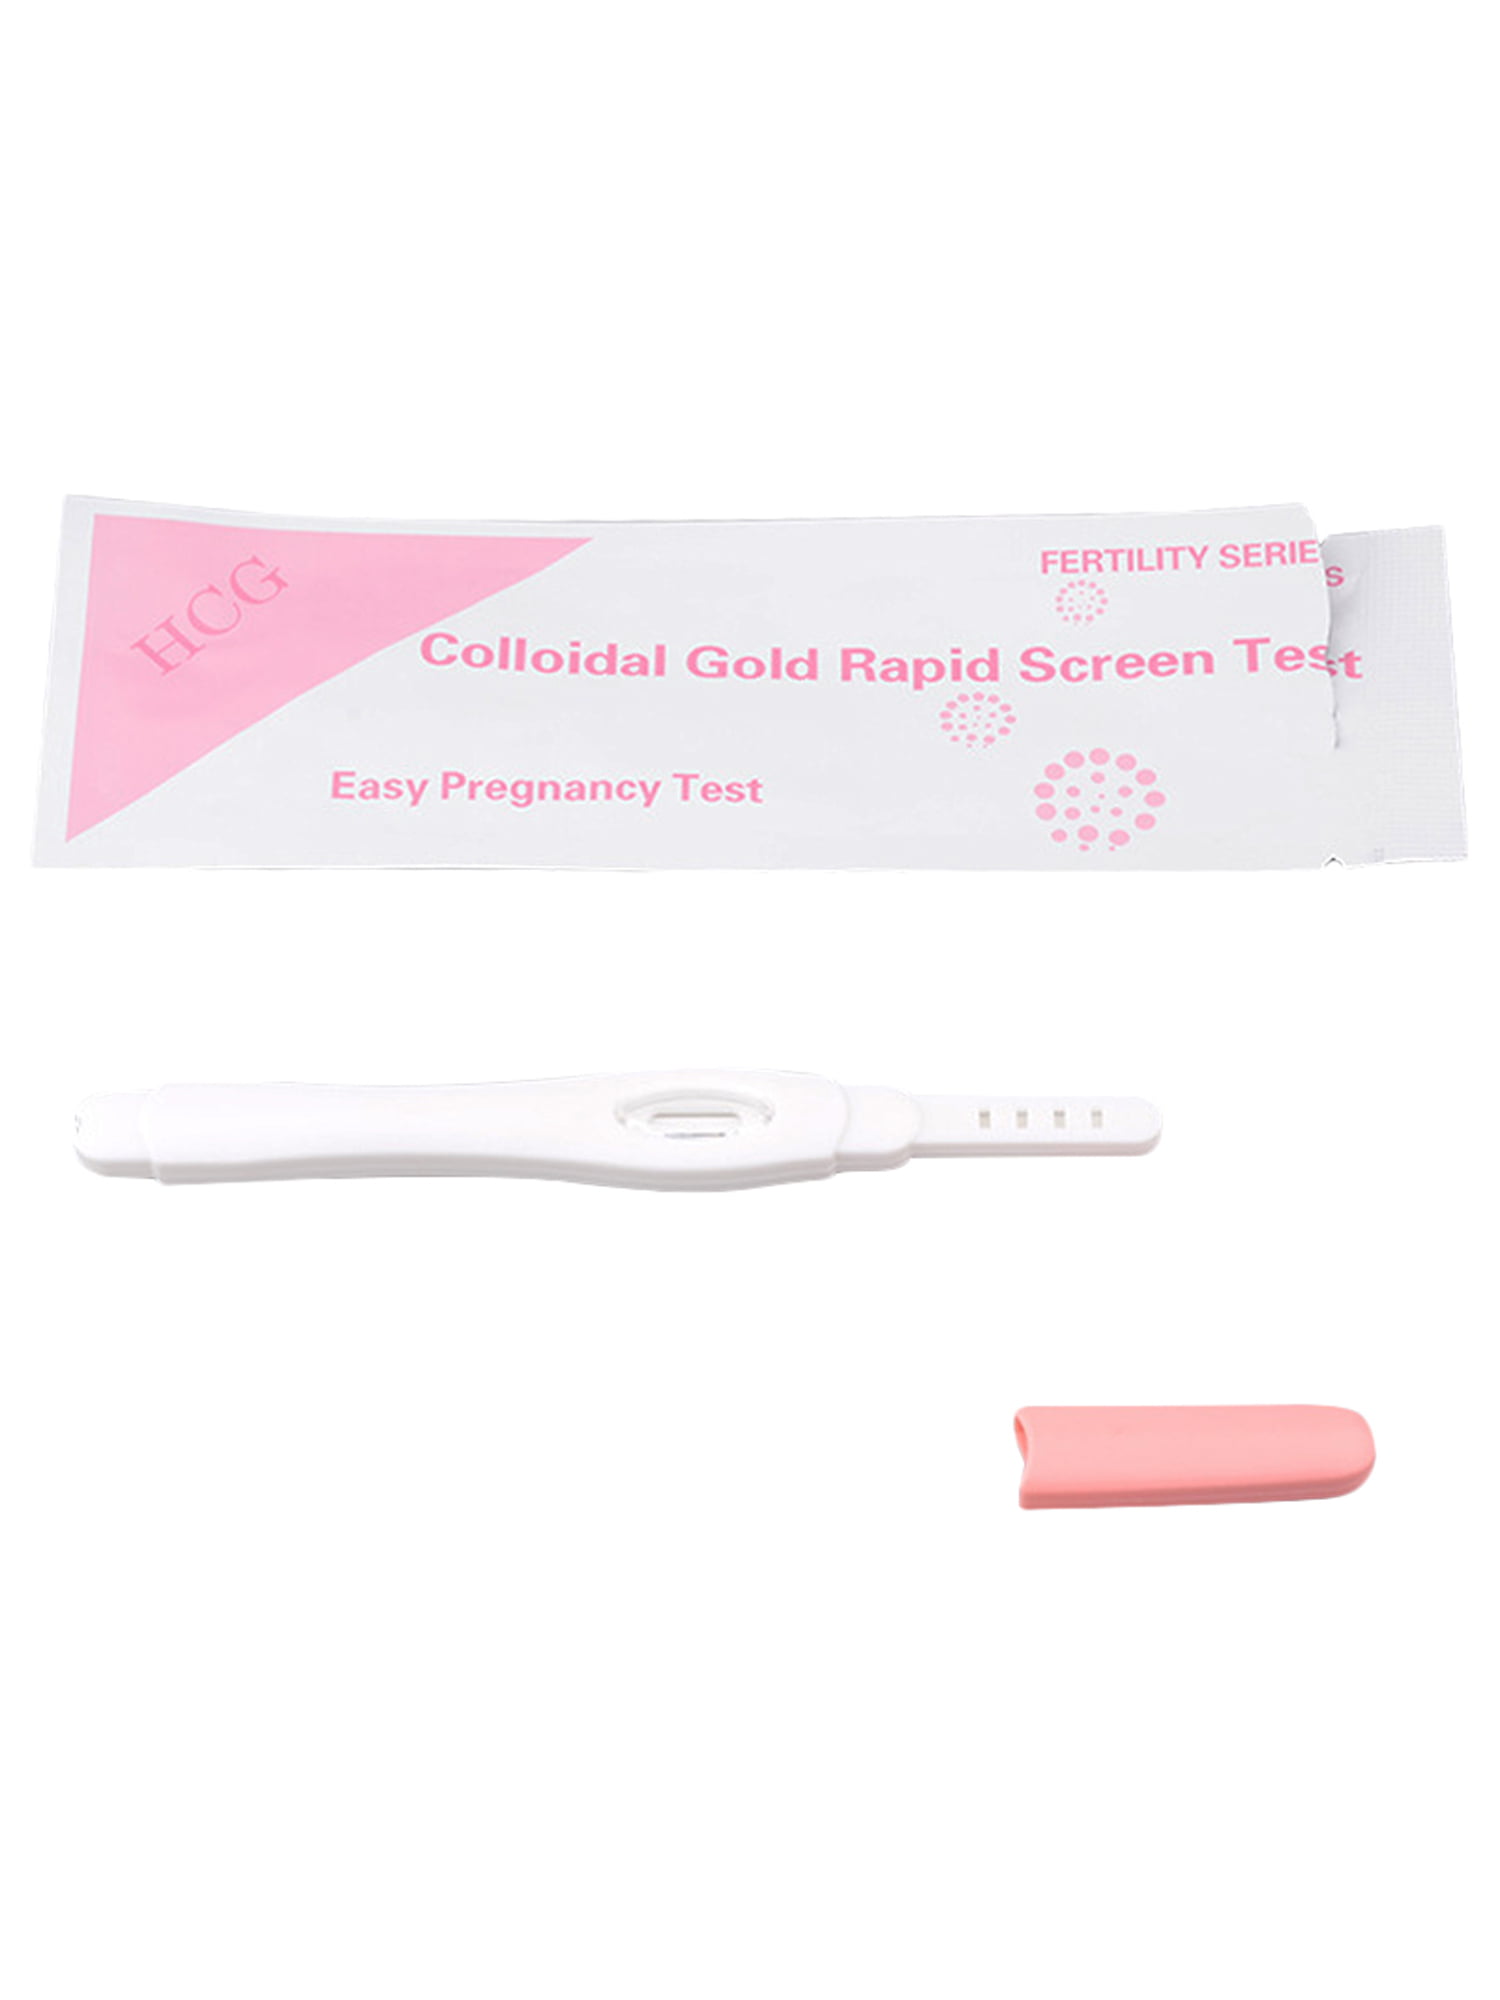 New 3xUltra Early Home Urine Pregnancy HCG Accurate Test Stick Stripe Kit Glove 